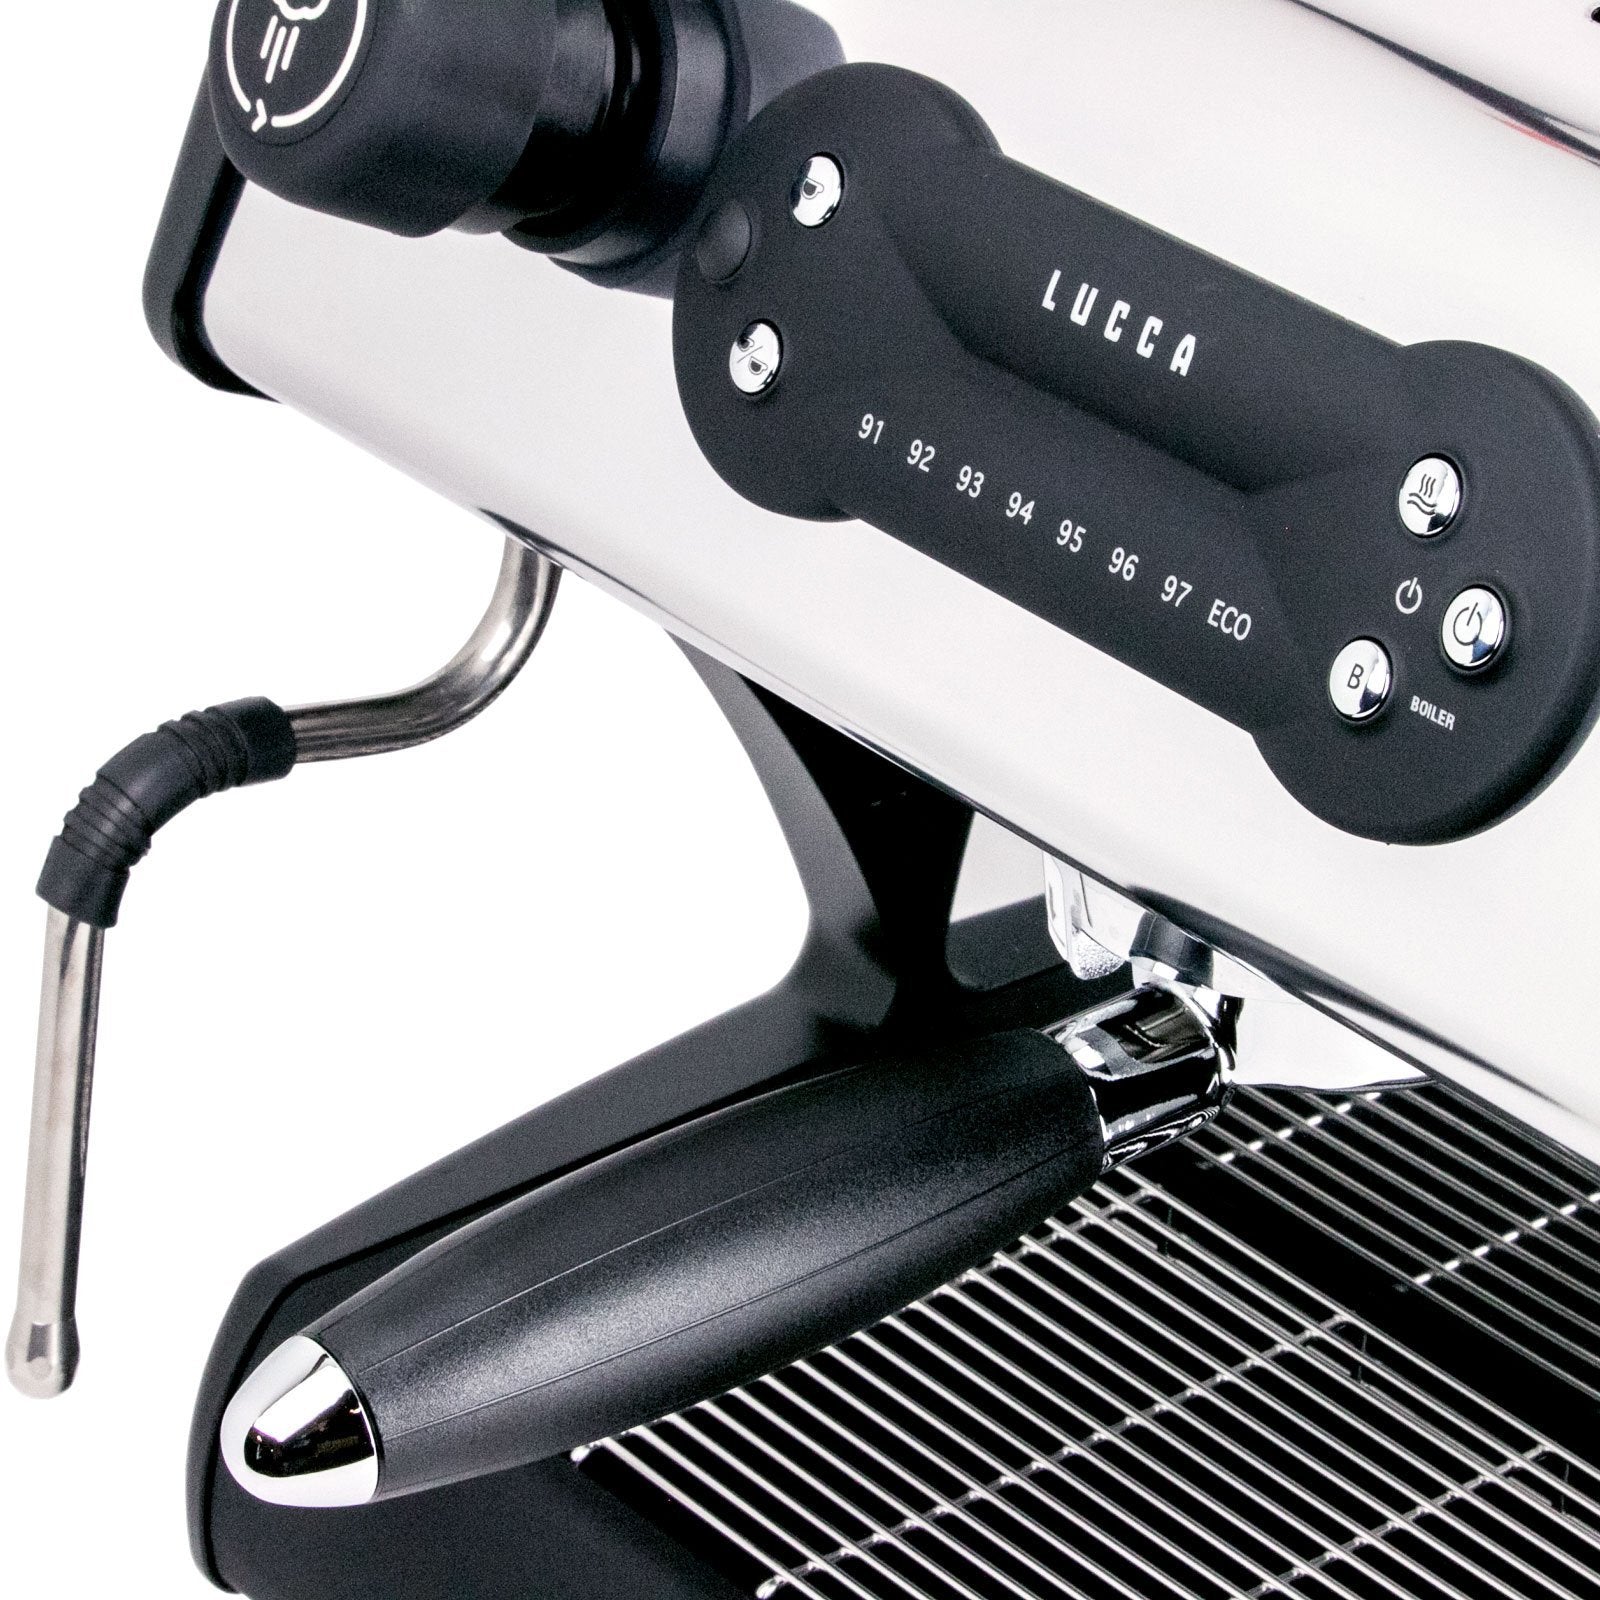 LUCCA A53 Direct Plumb Espresso Machine by La Spaziale with standard side panels by Clive Coffee, steam wand - Knockout